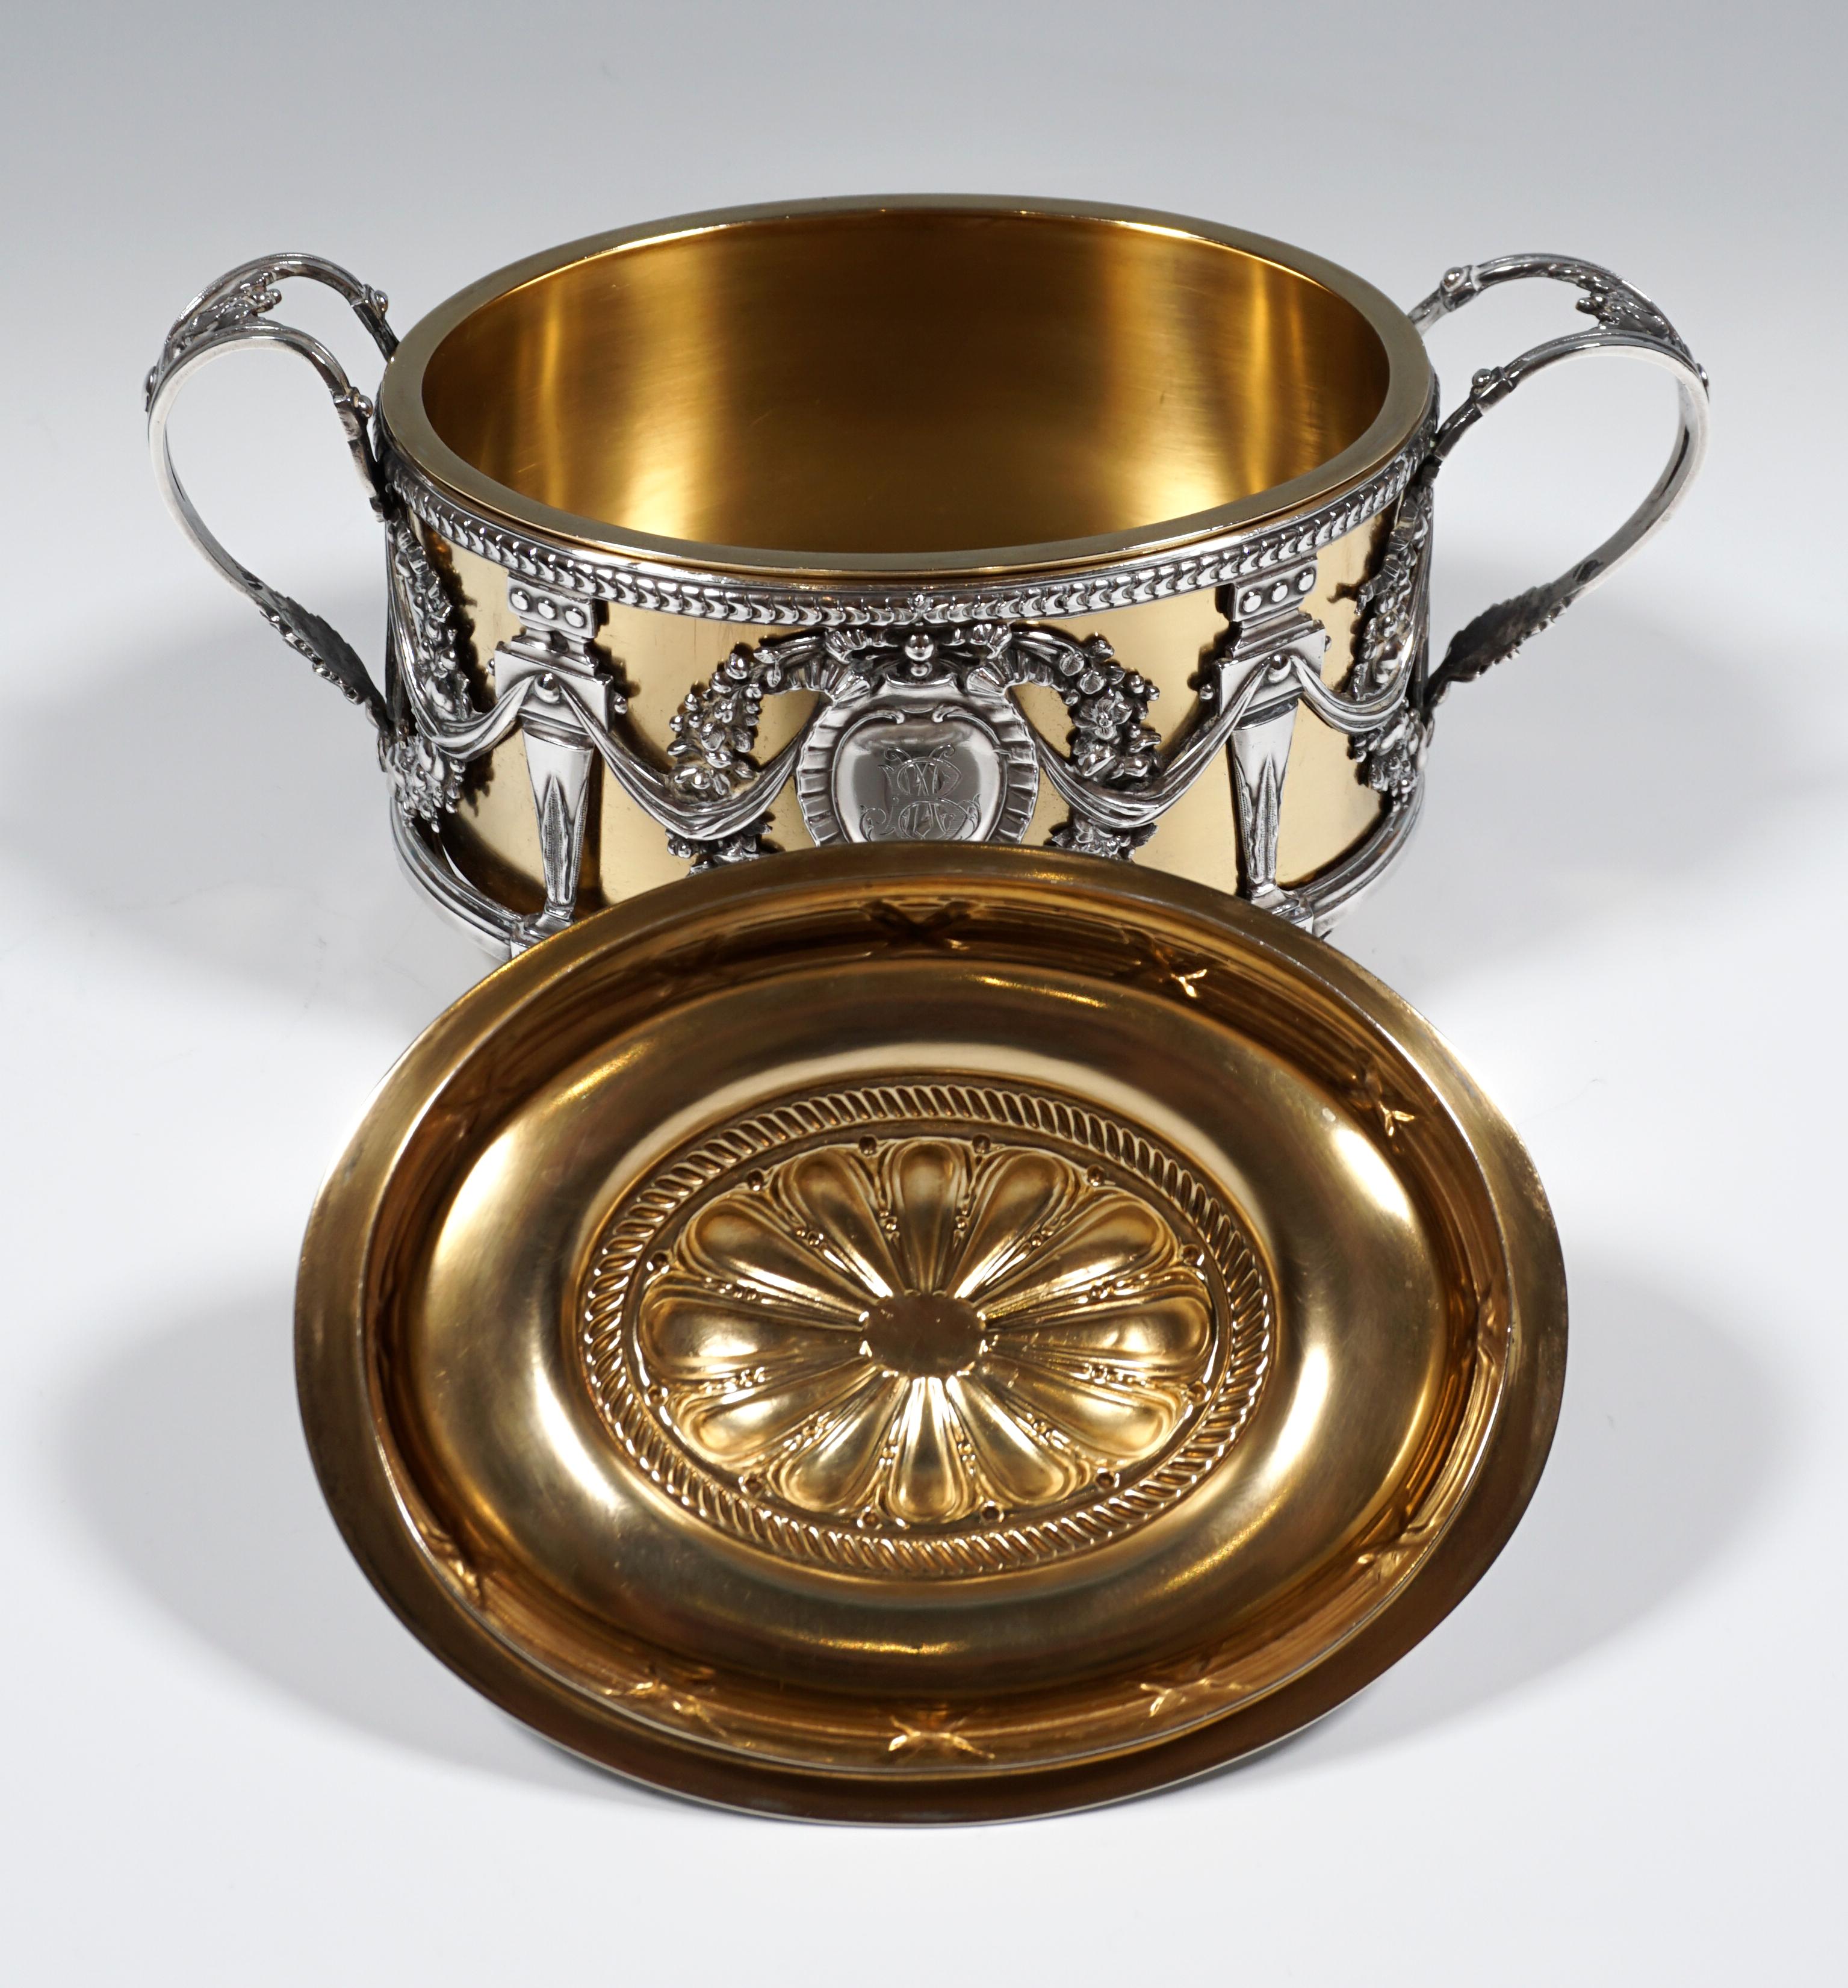 Early 20th Century Magnificent Silver Sugar Bowl with Gilding, Adolphe Boulenger Paris, around 1890